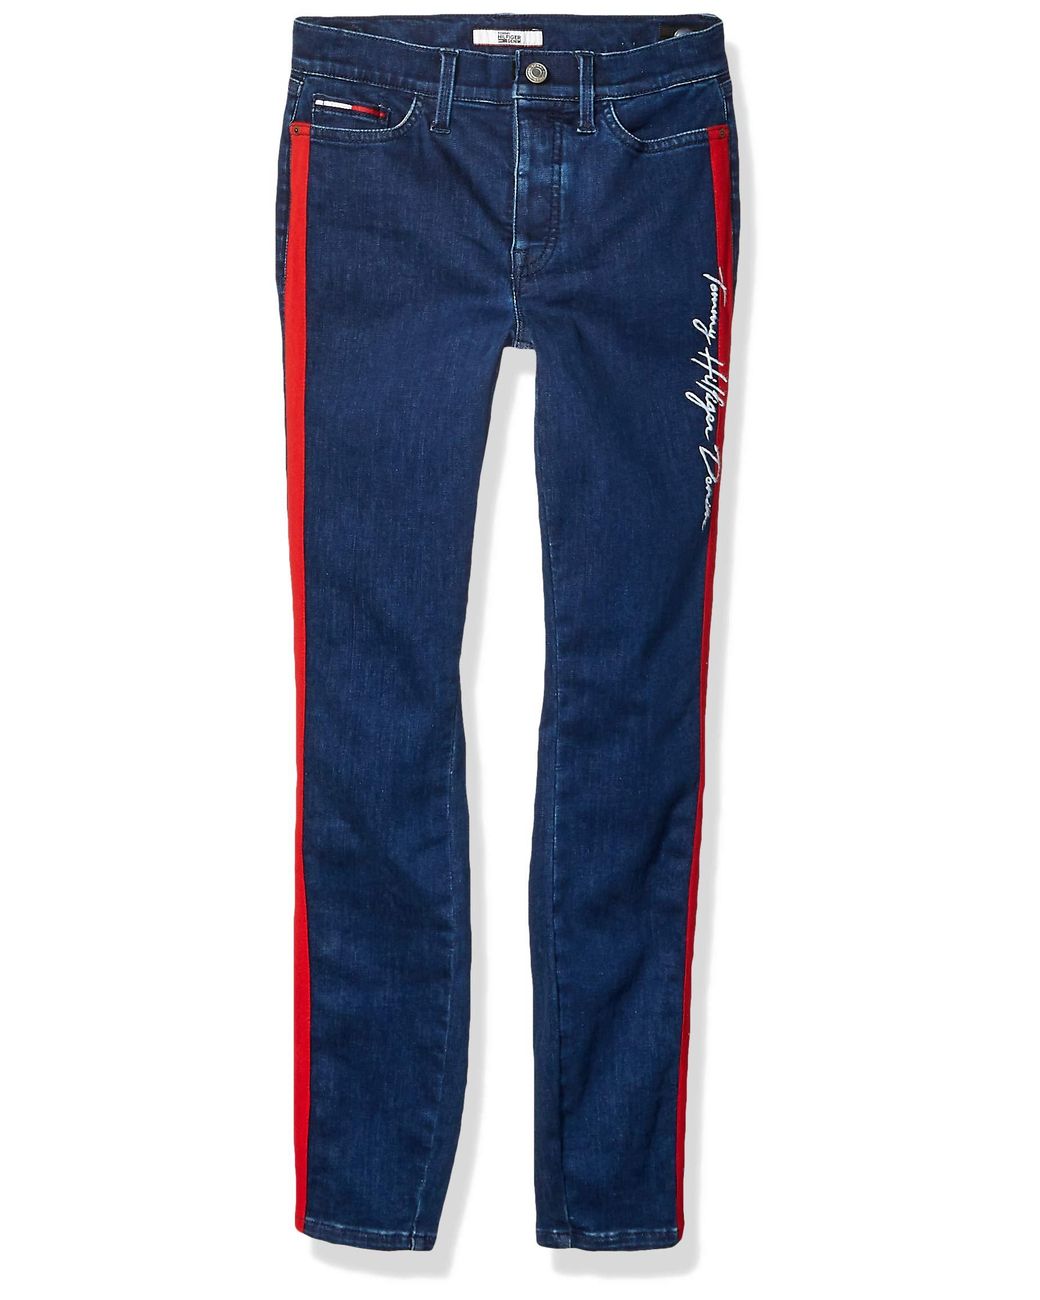 Tommy Hilfiger Girls Big Adaptive Denim Short with Velcro Brand Closure and Magnetic Fly 